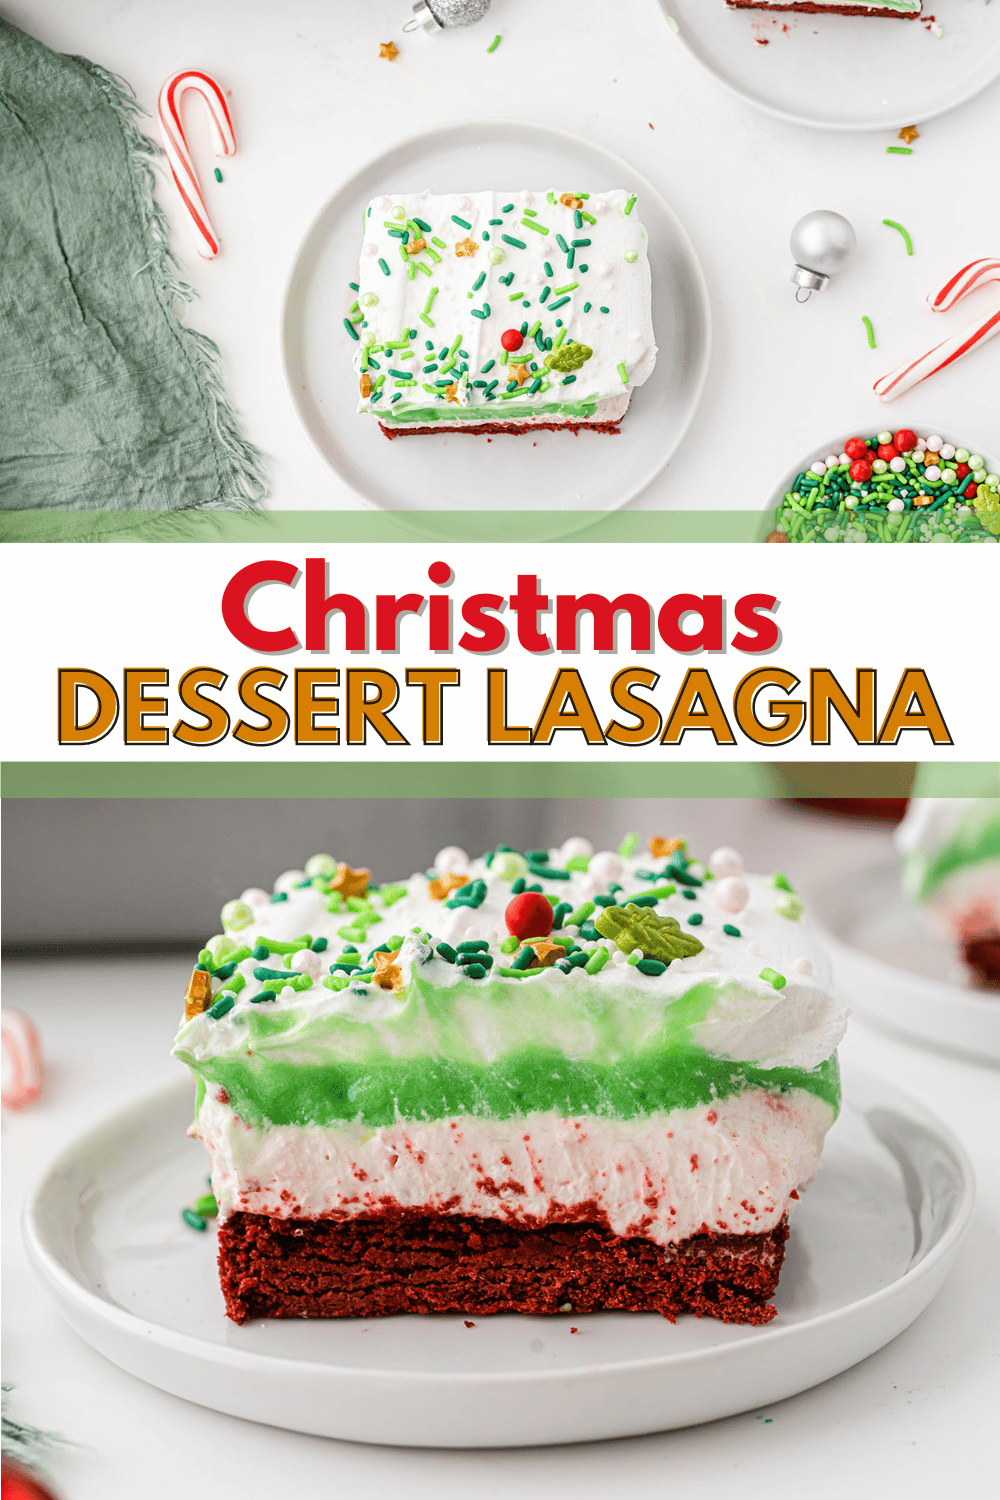 This Christmas Dessert Lasagna is made with delicious layers of red velvet brownies, and vanilla pudding, and topped with tangy peppermint. #christmasdessertlasagna #christmasdessert #dessertlasagna via @wondermomwannab